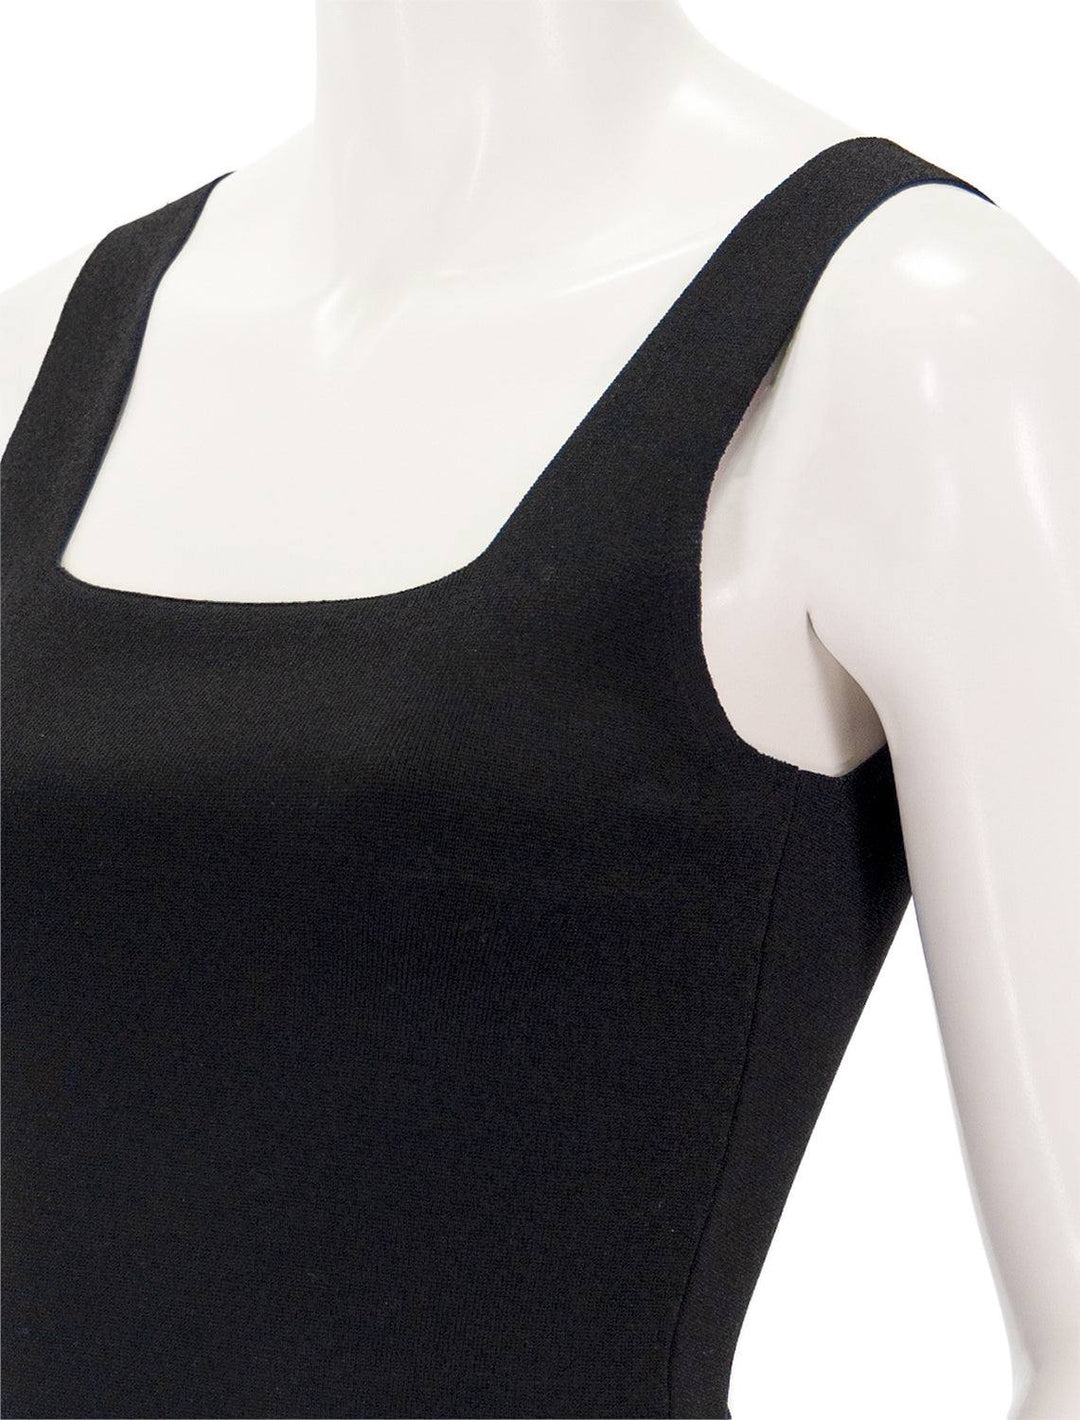 Close-up view of Vince's square neck sweater tank in black.